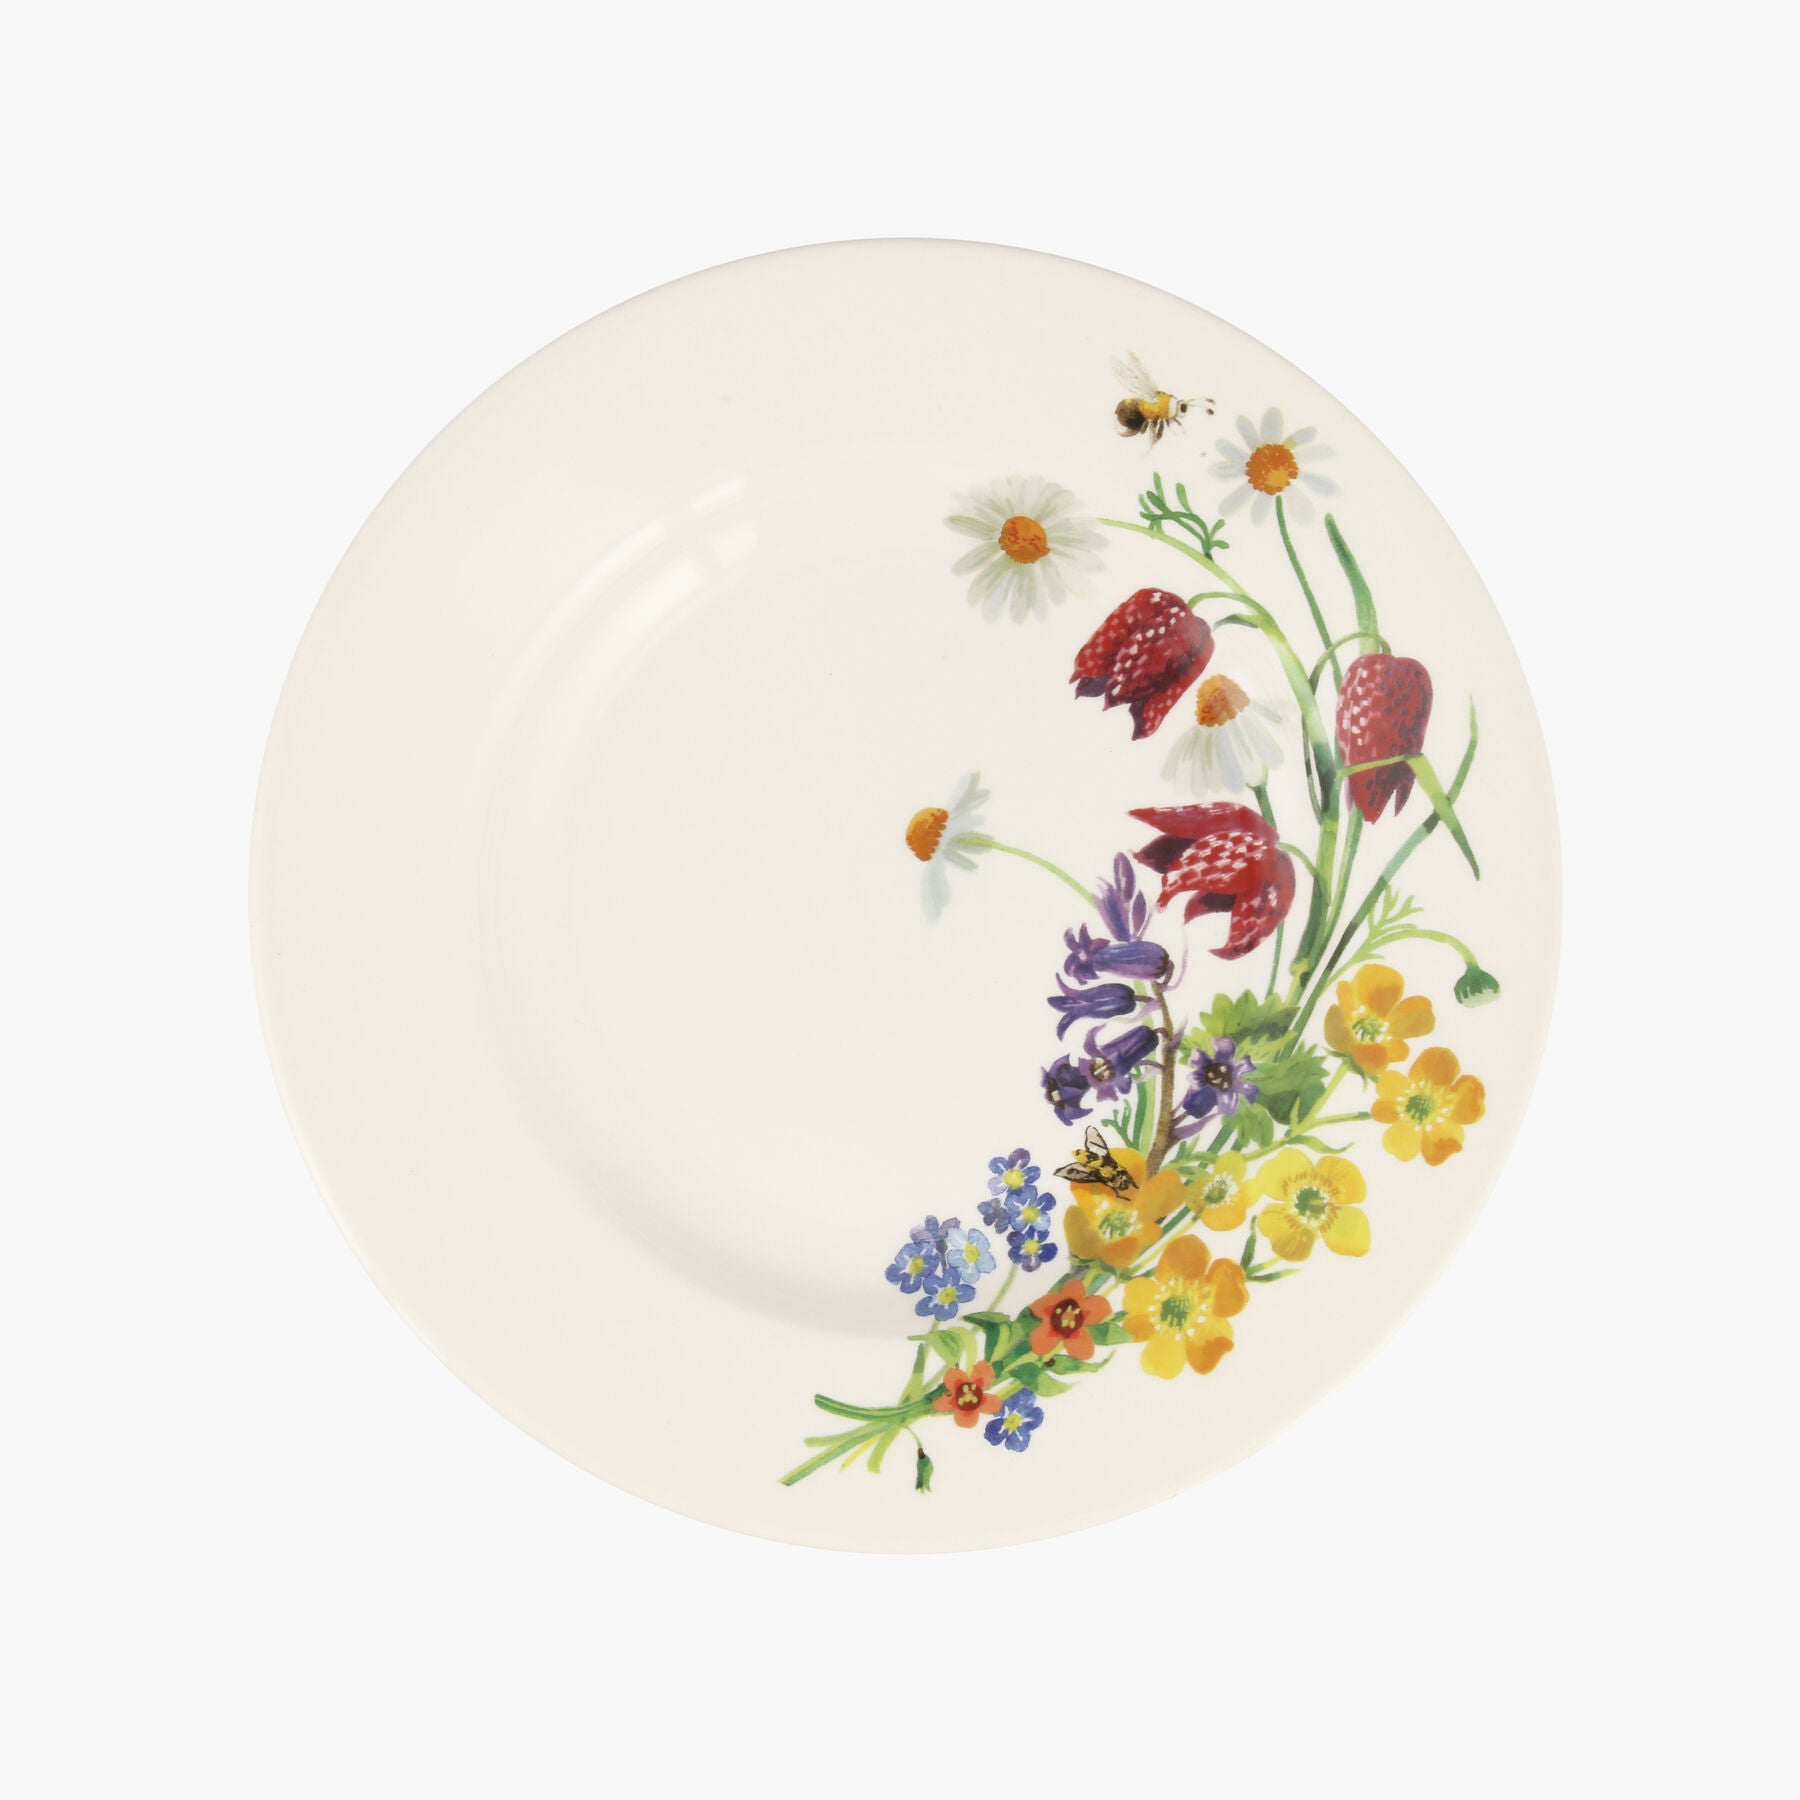 Wild Flowers 8 1/2 Inch Plate - Unique Handmade & Handpainted English Earthenware British-Made Potte